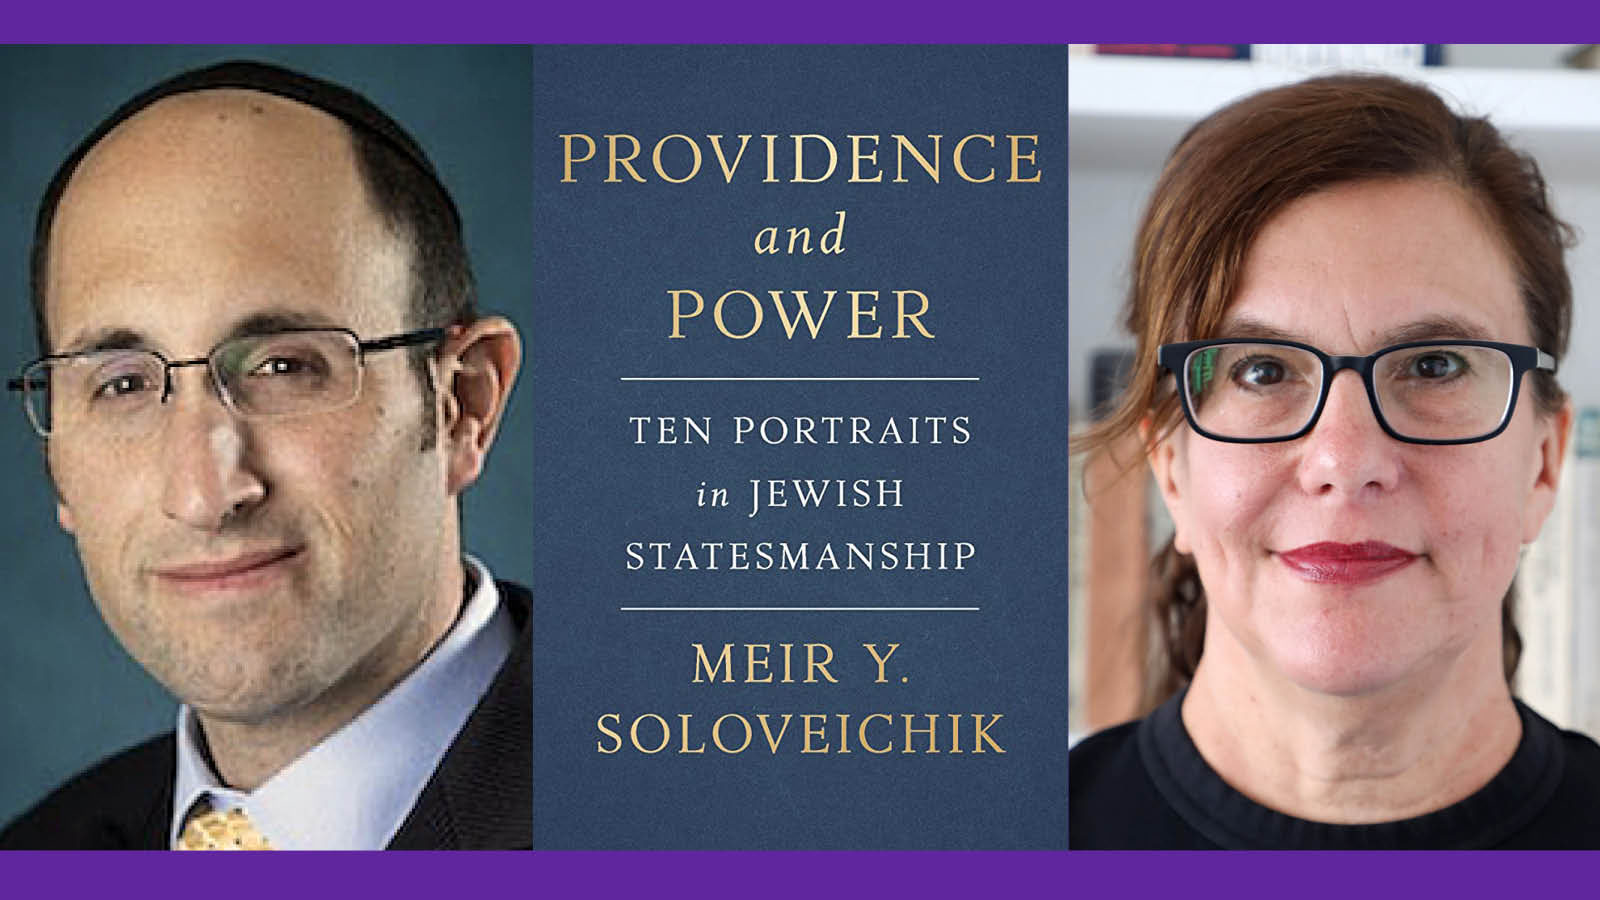 Providence and Power